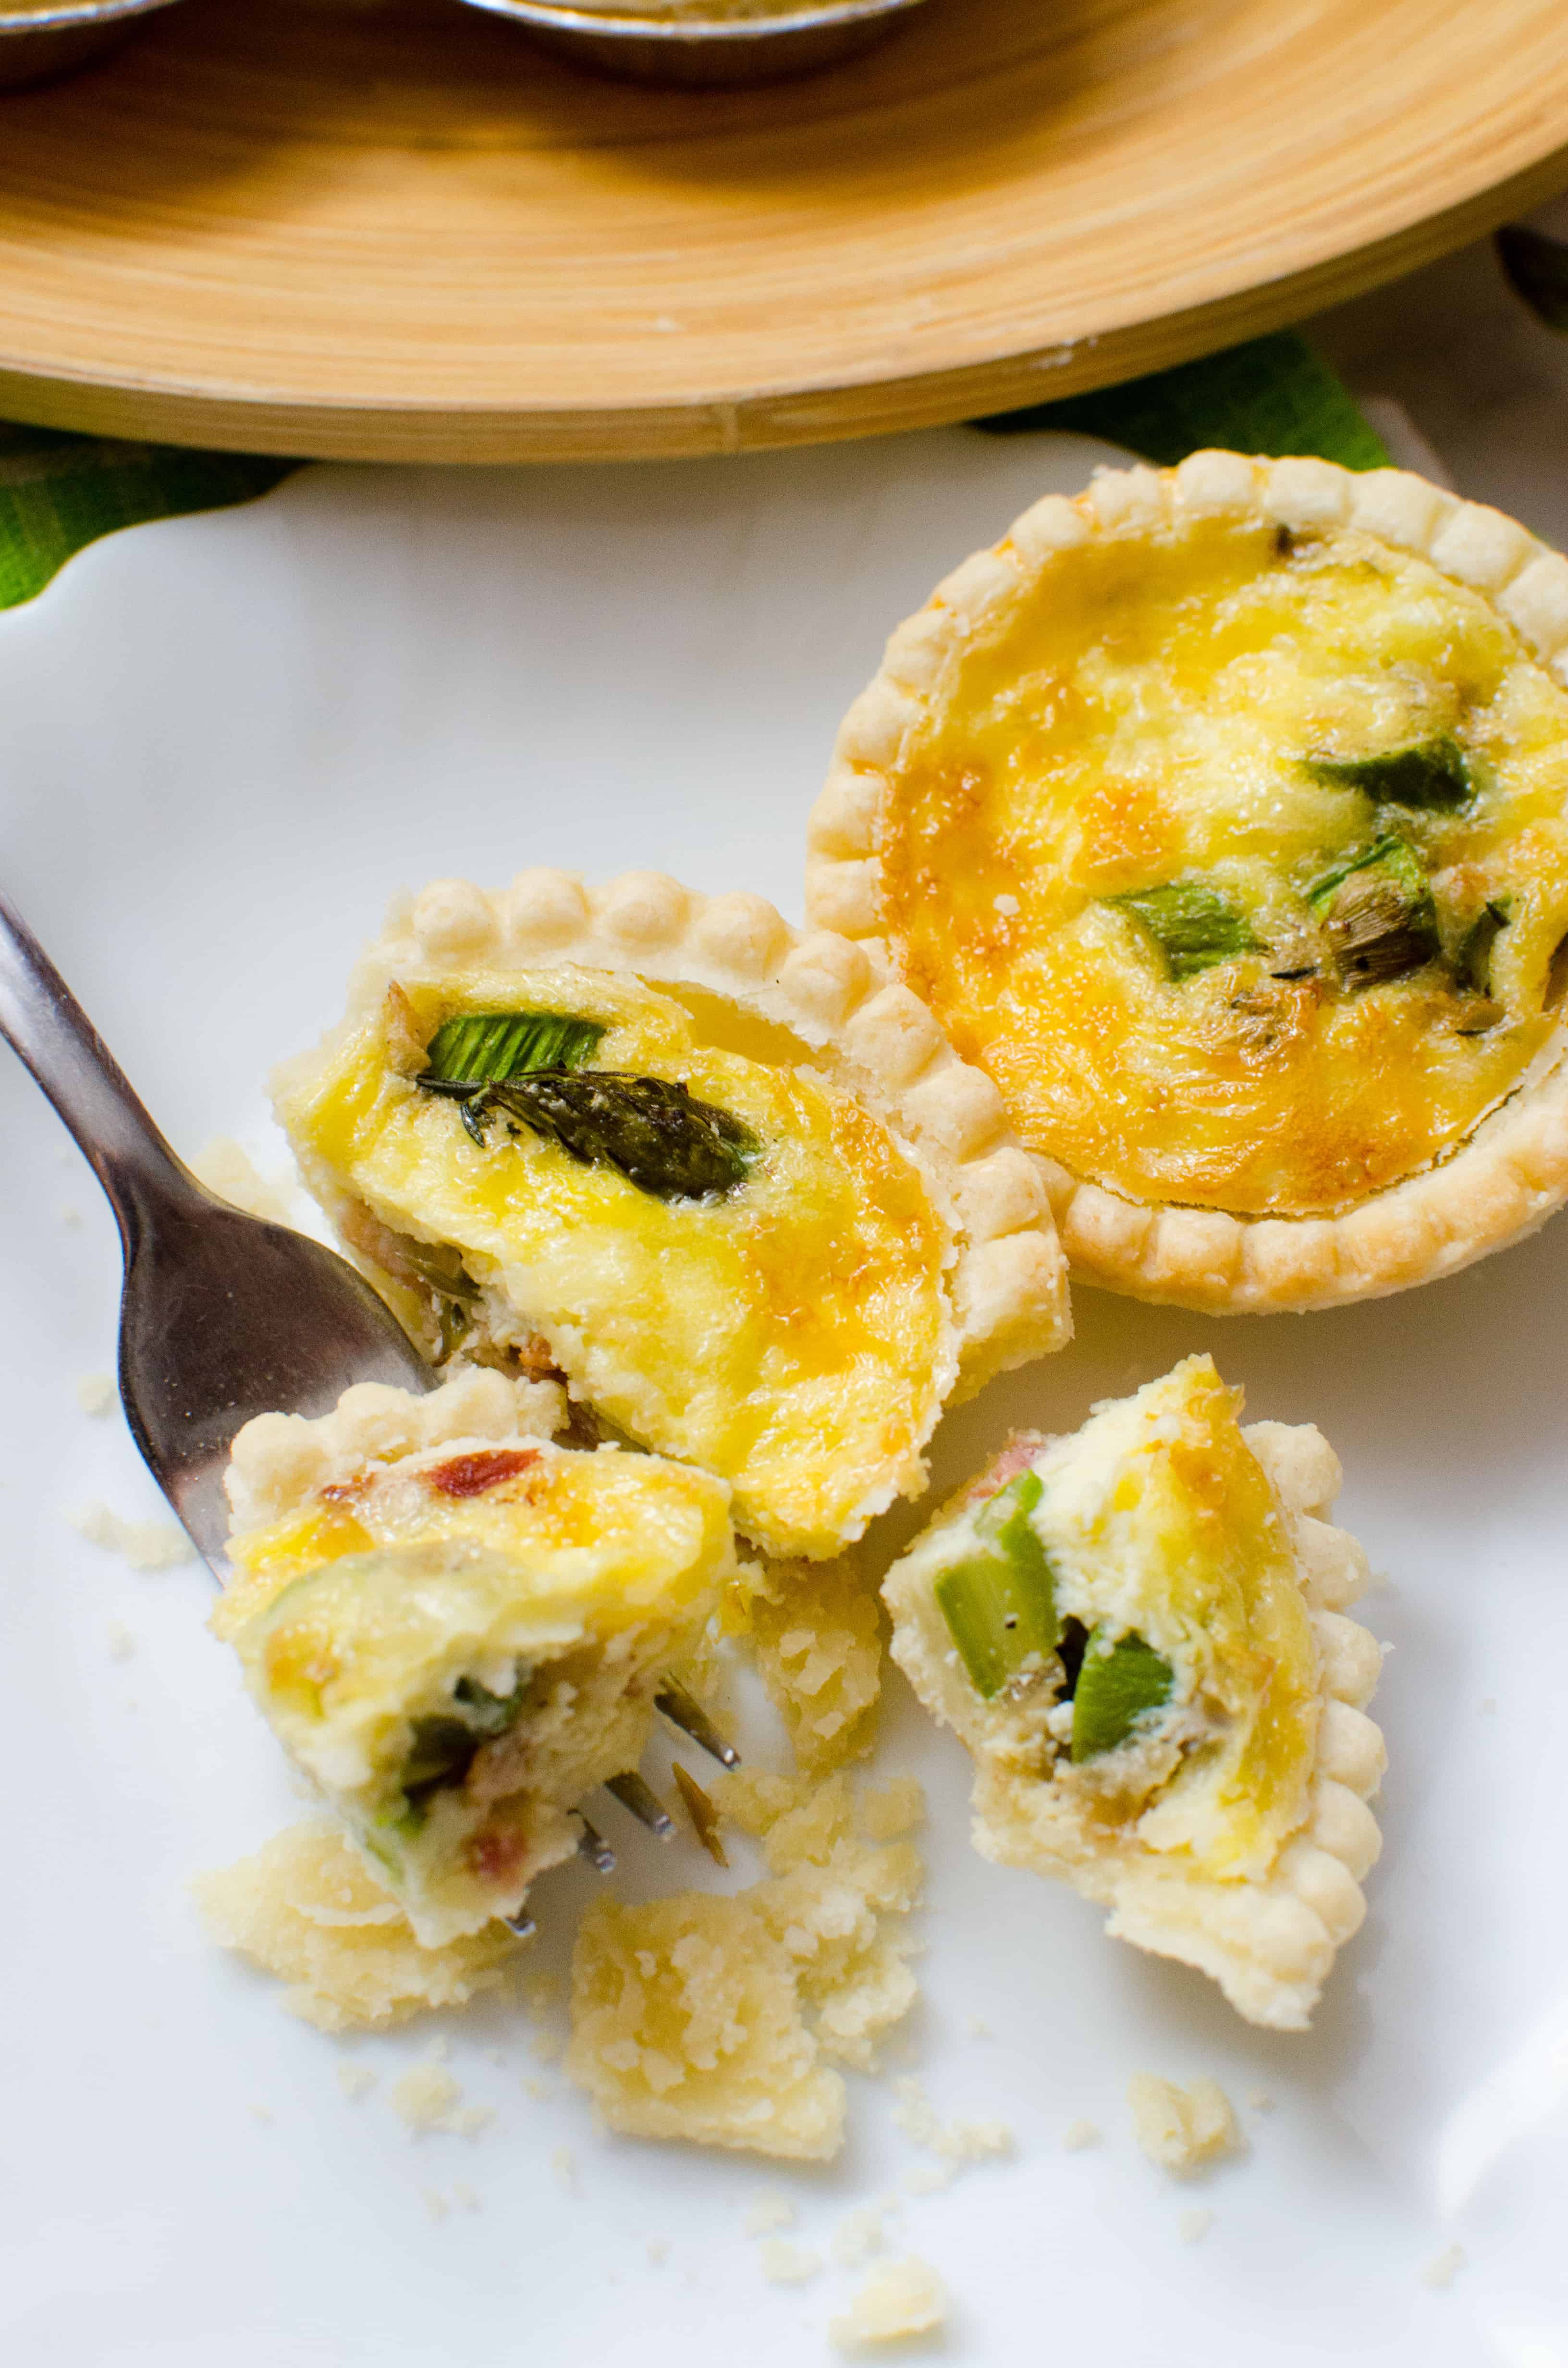 Bacon Asparagus Tarts Recipe - Perfect for Spring! - Thrifty Jinxy